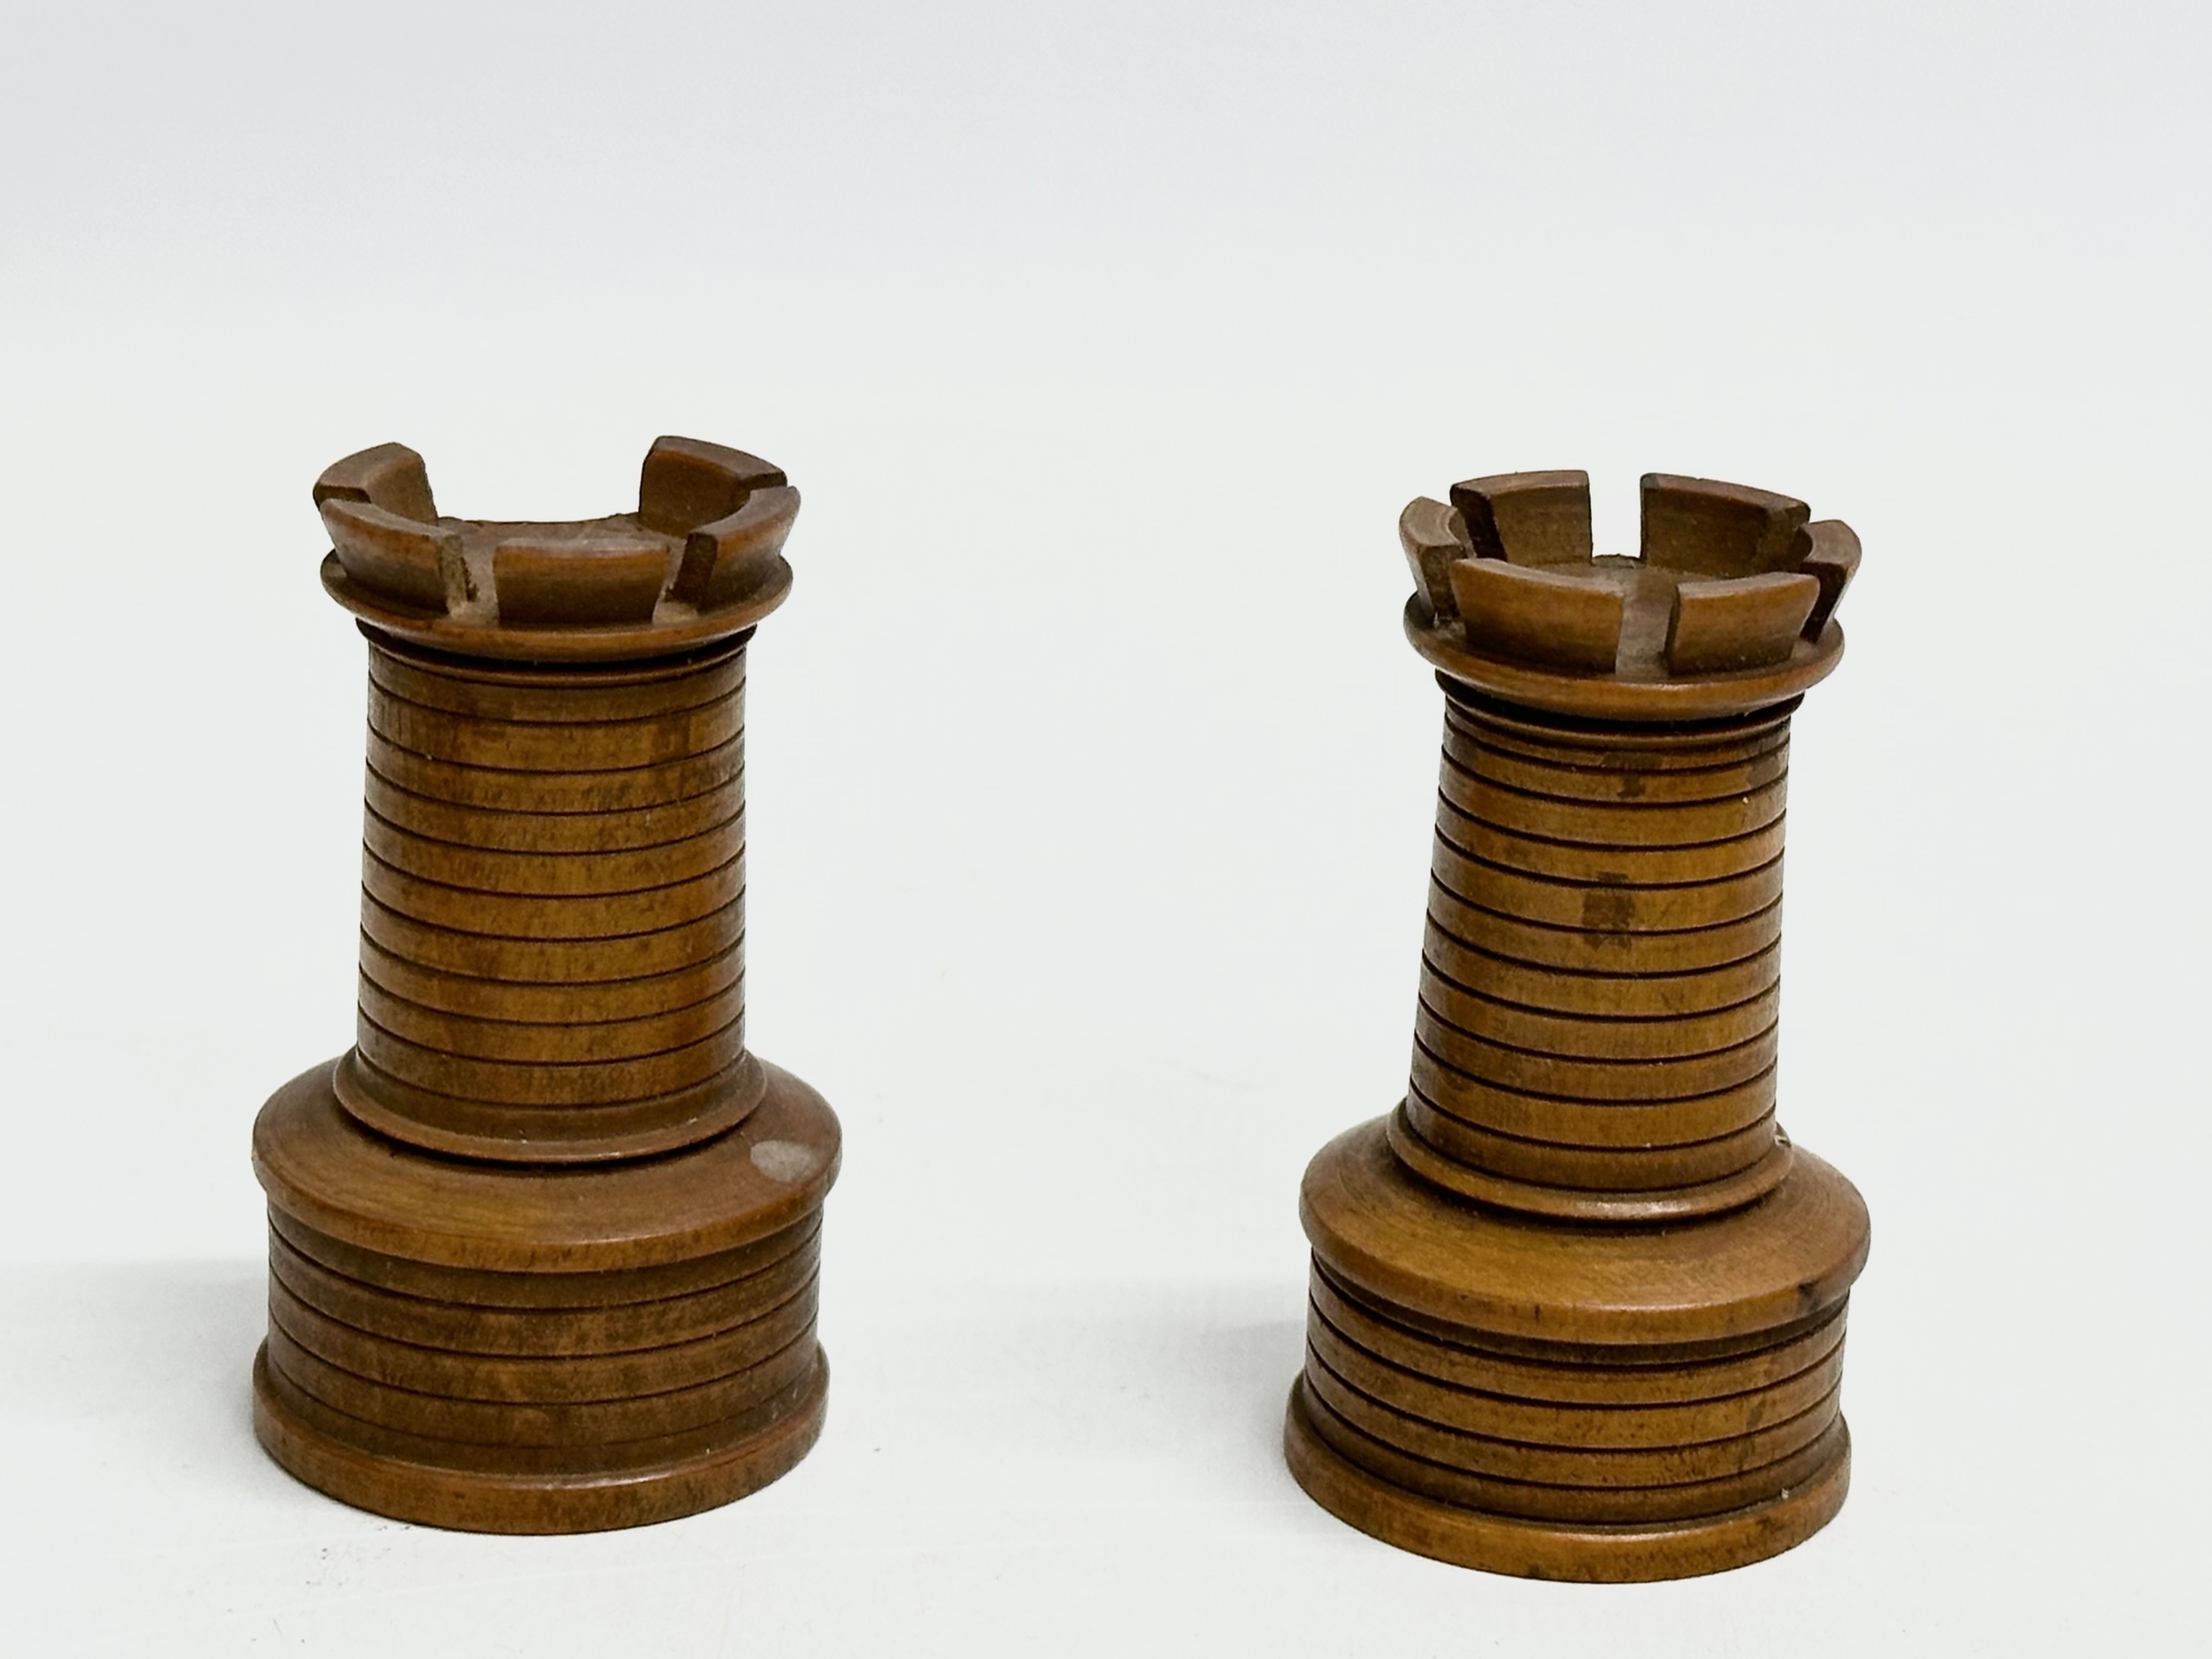 Good quality 19th Century chess pieces in the style of the Holy Land Crusade, Islamic vs Christian - Image 16 of 17